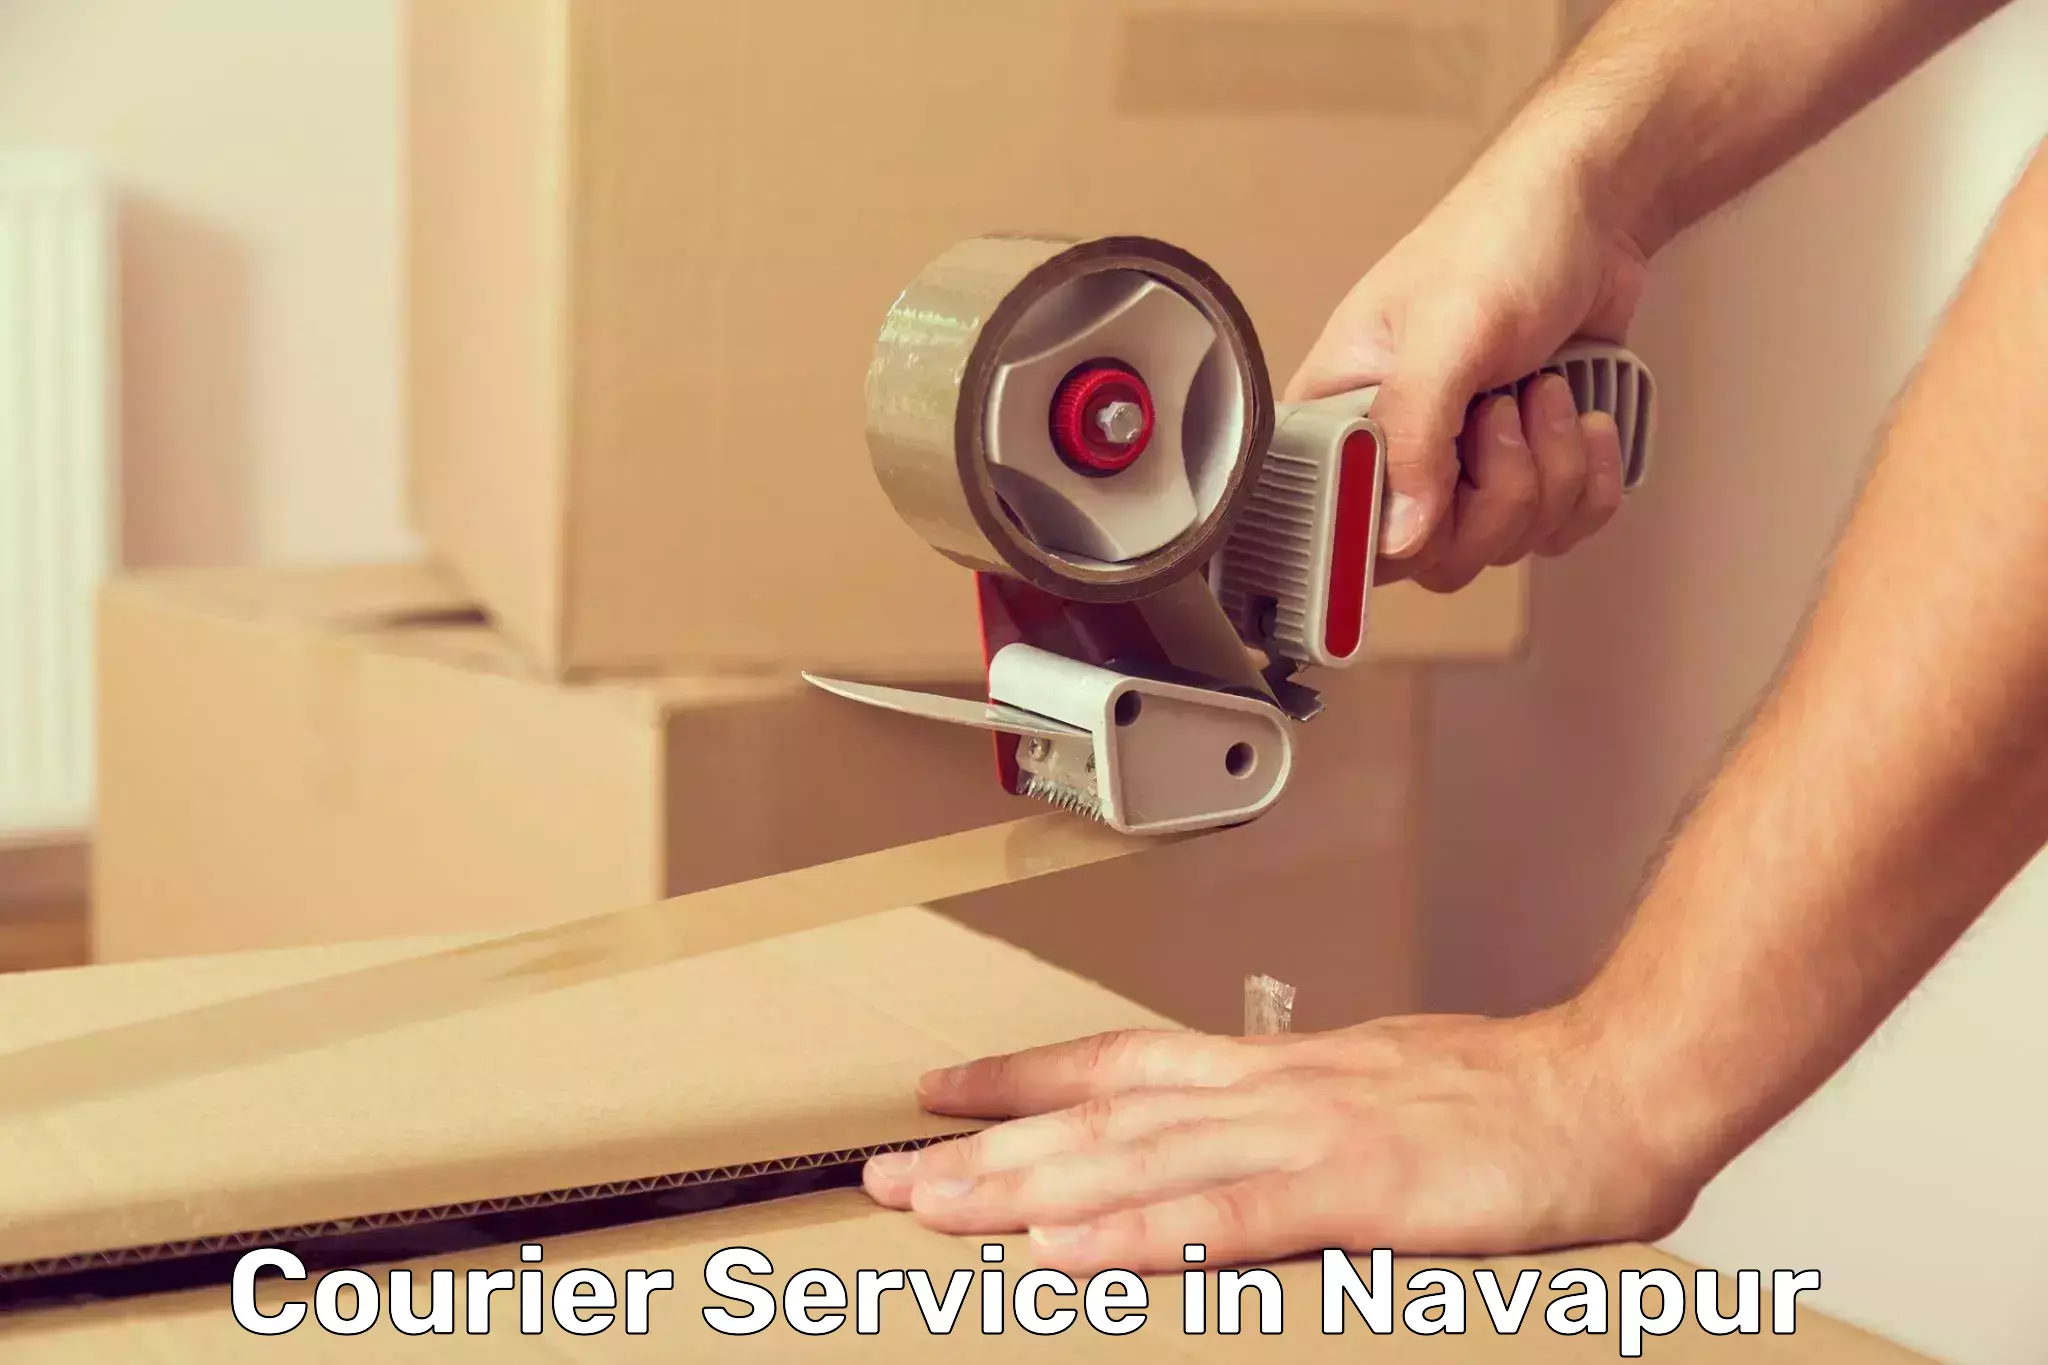 Wholesale parcel delivery in Navapur